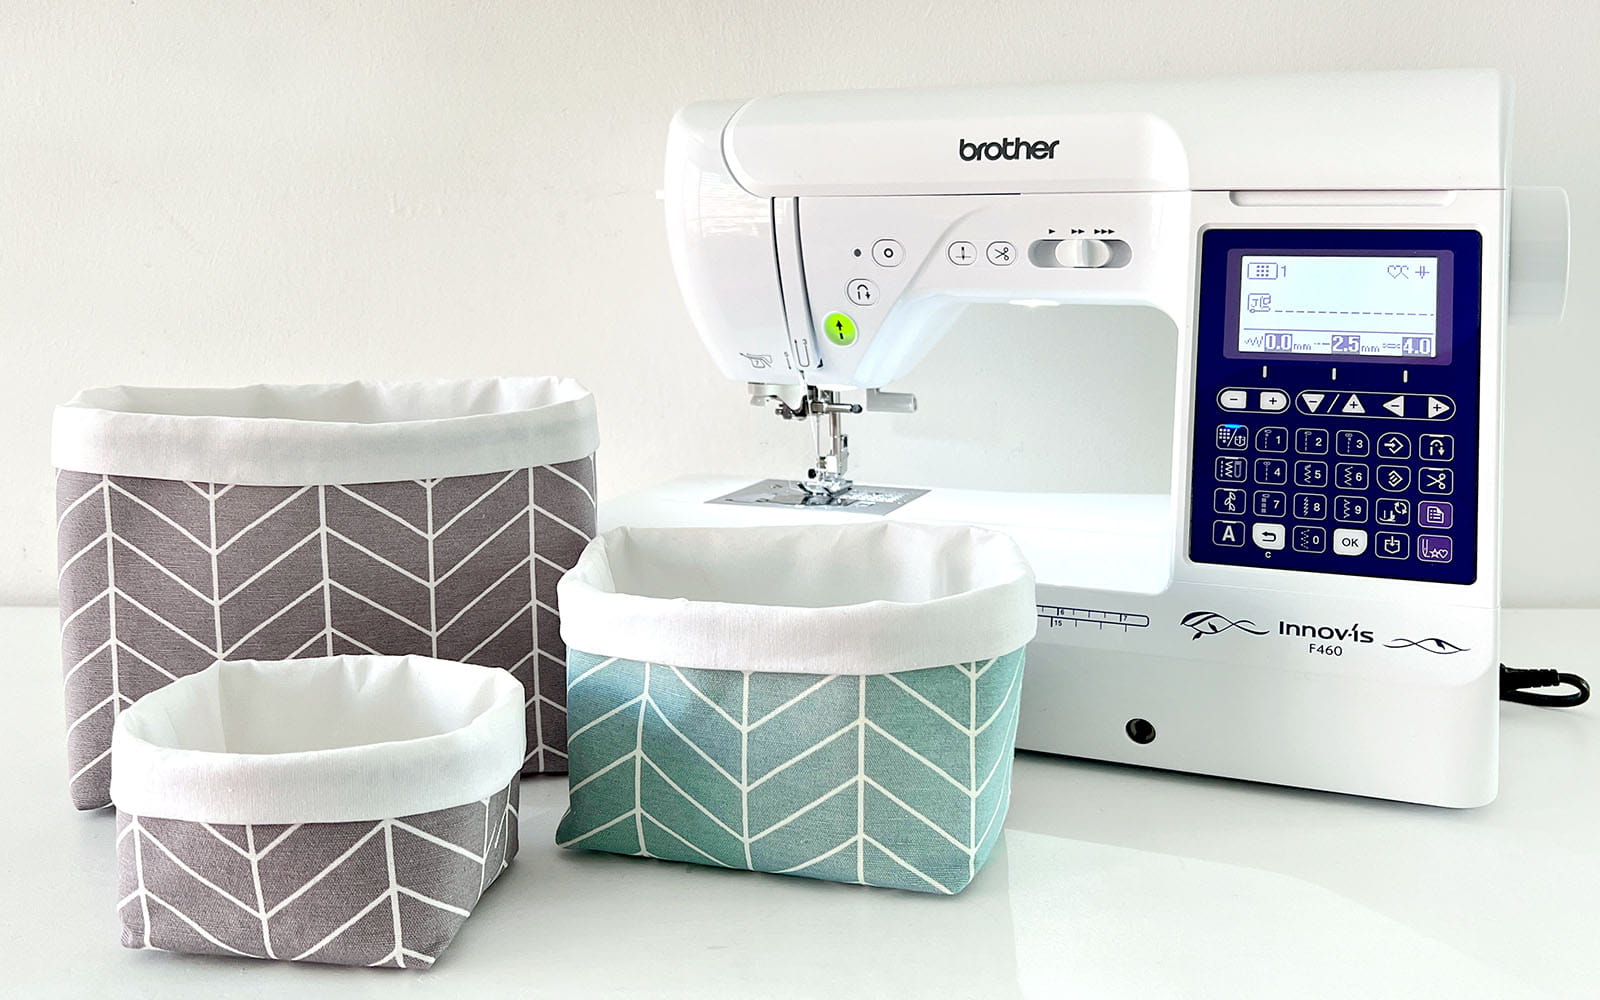 Fabric storage baskets with Brother Innov-is F550 sewing machine